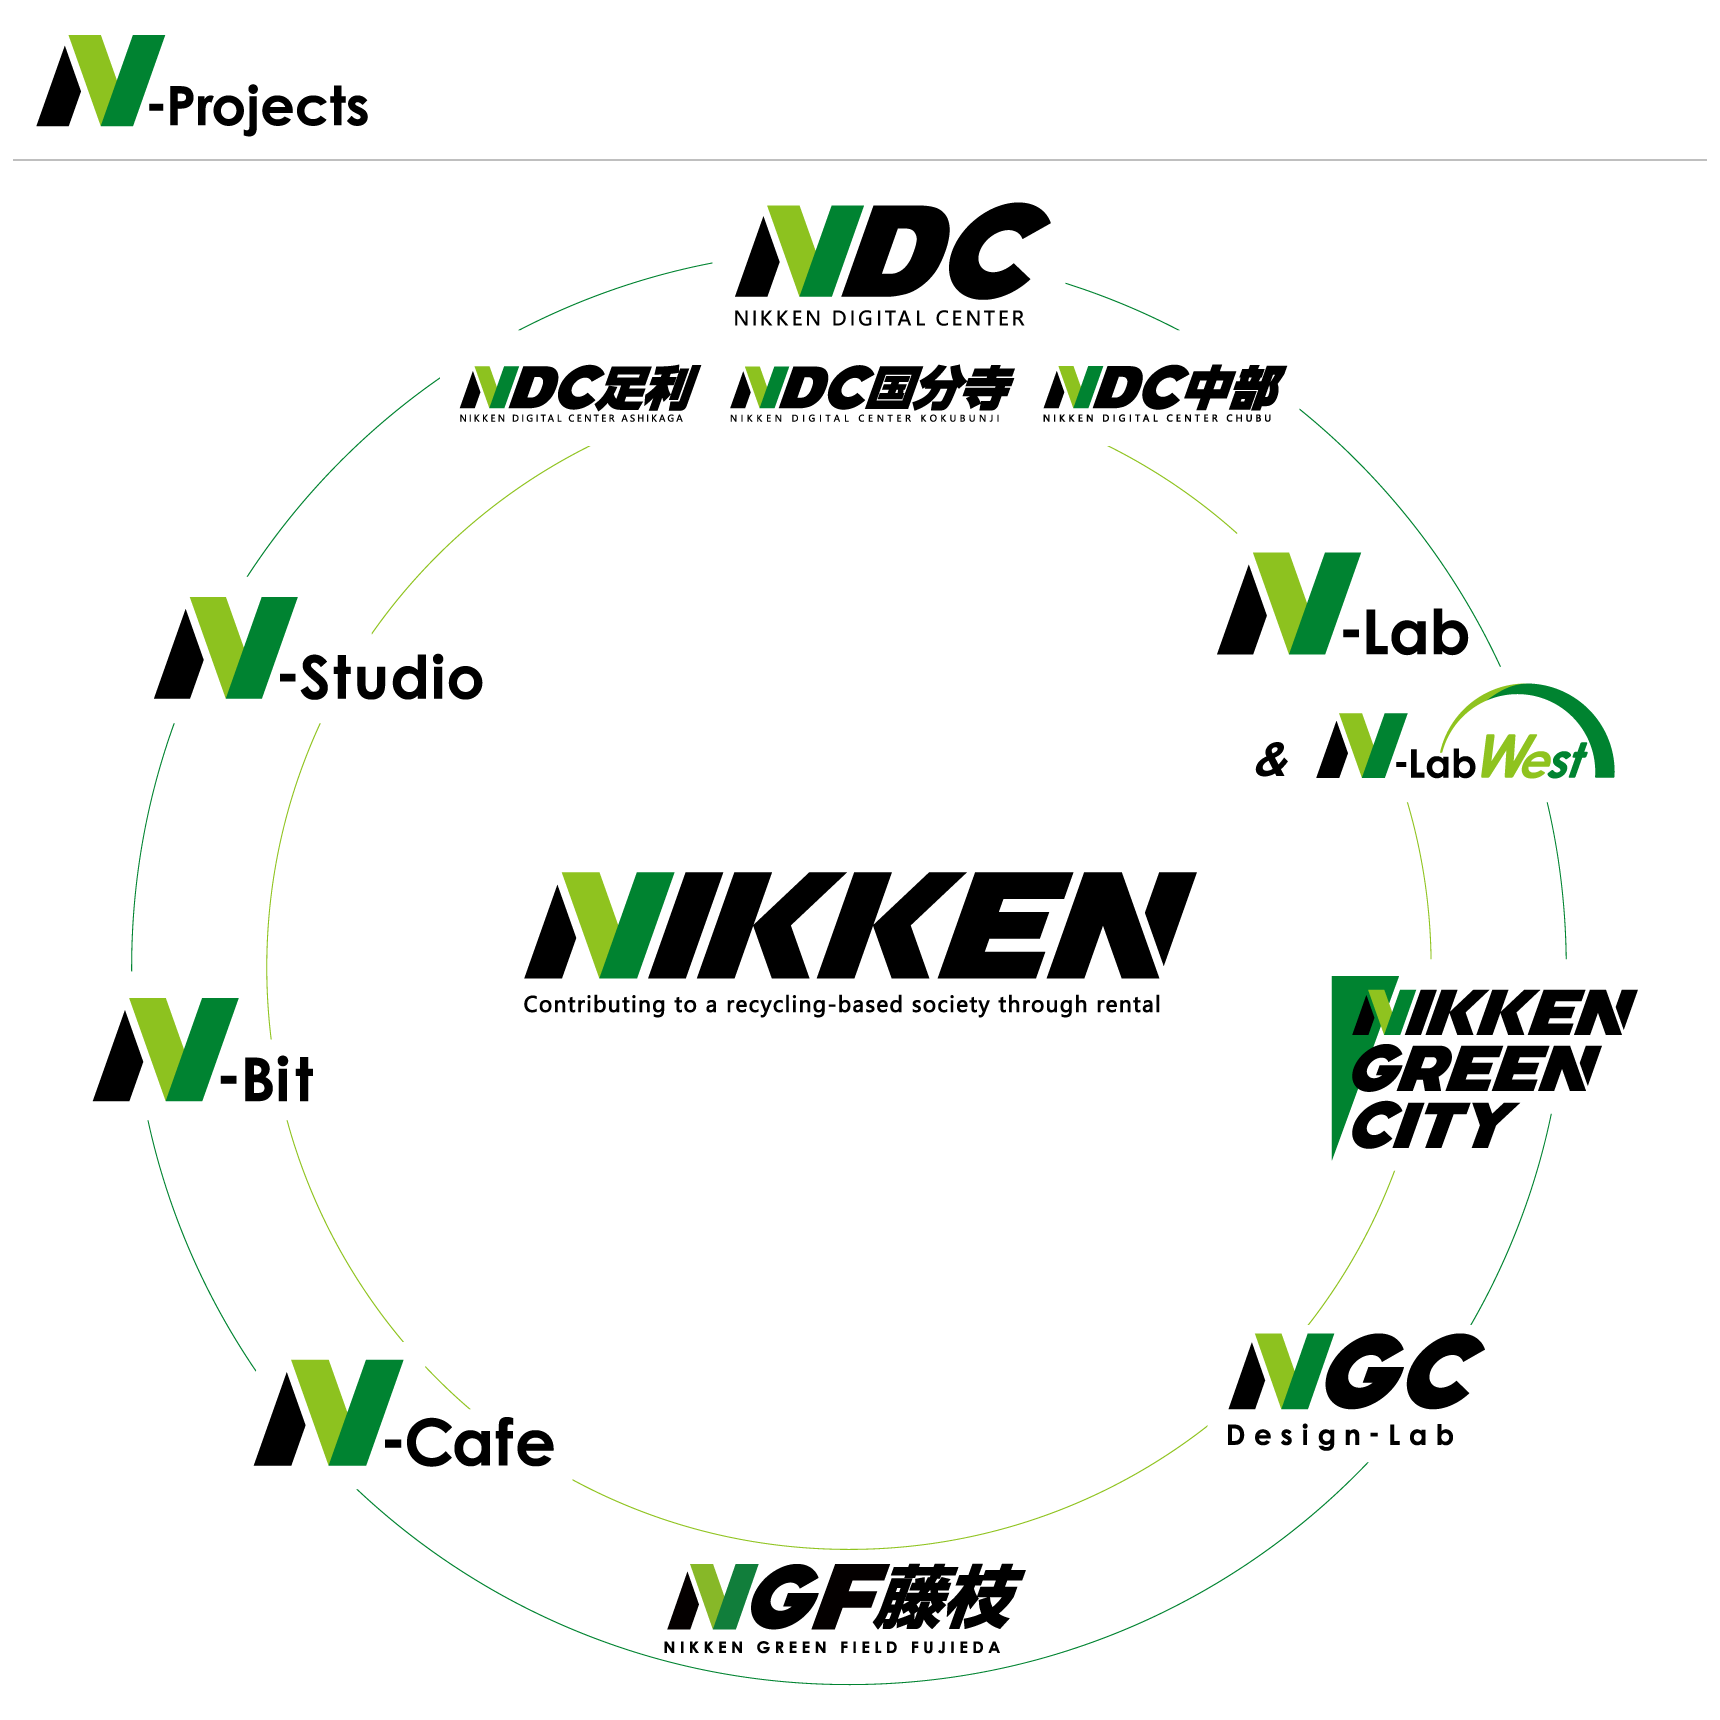 N-Projects